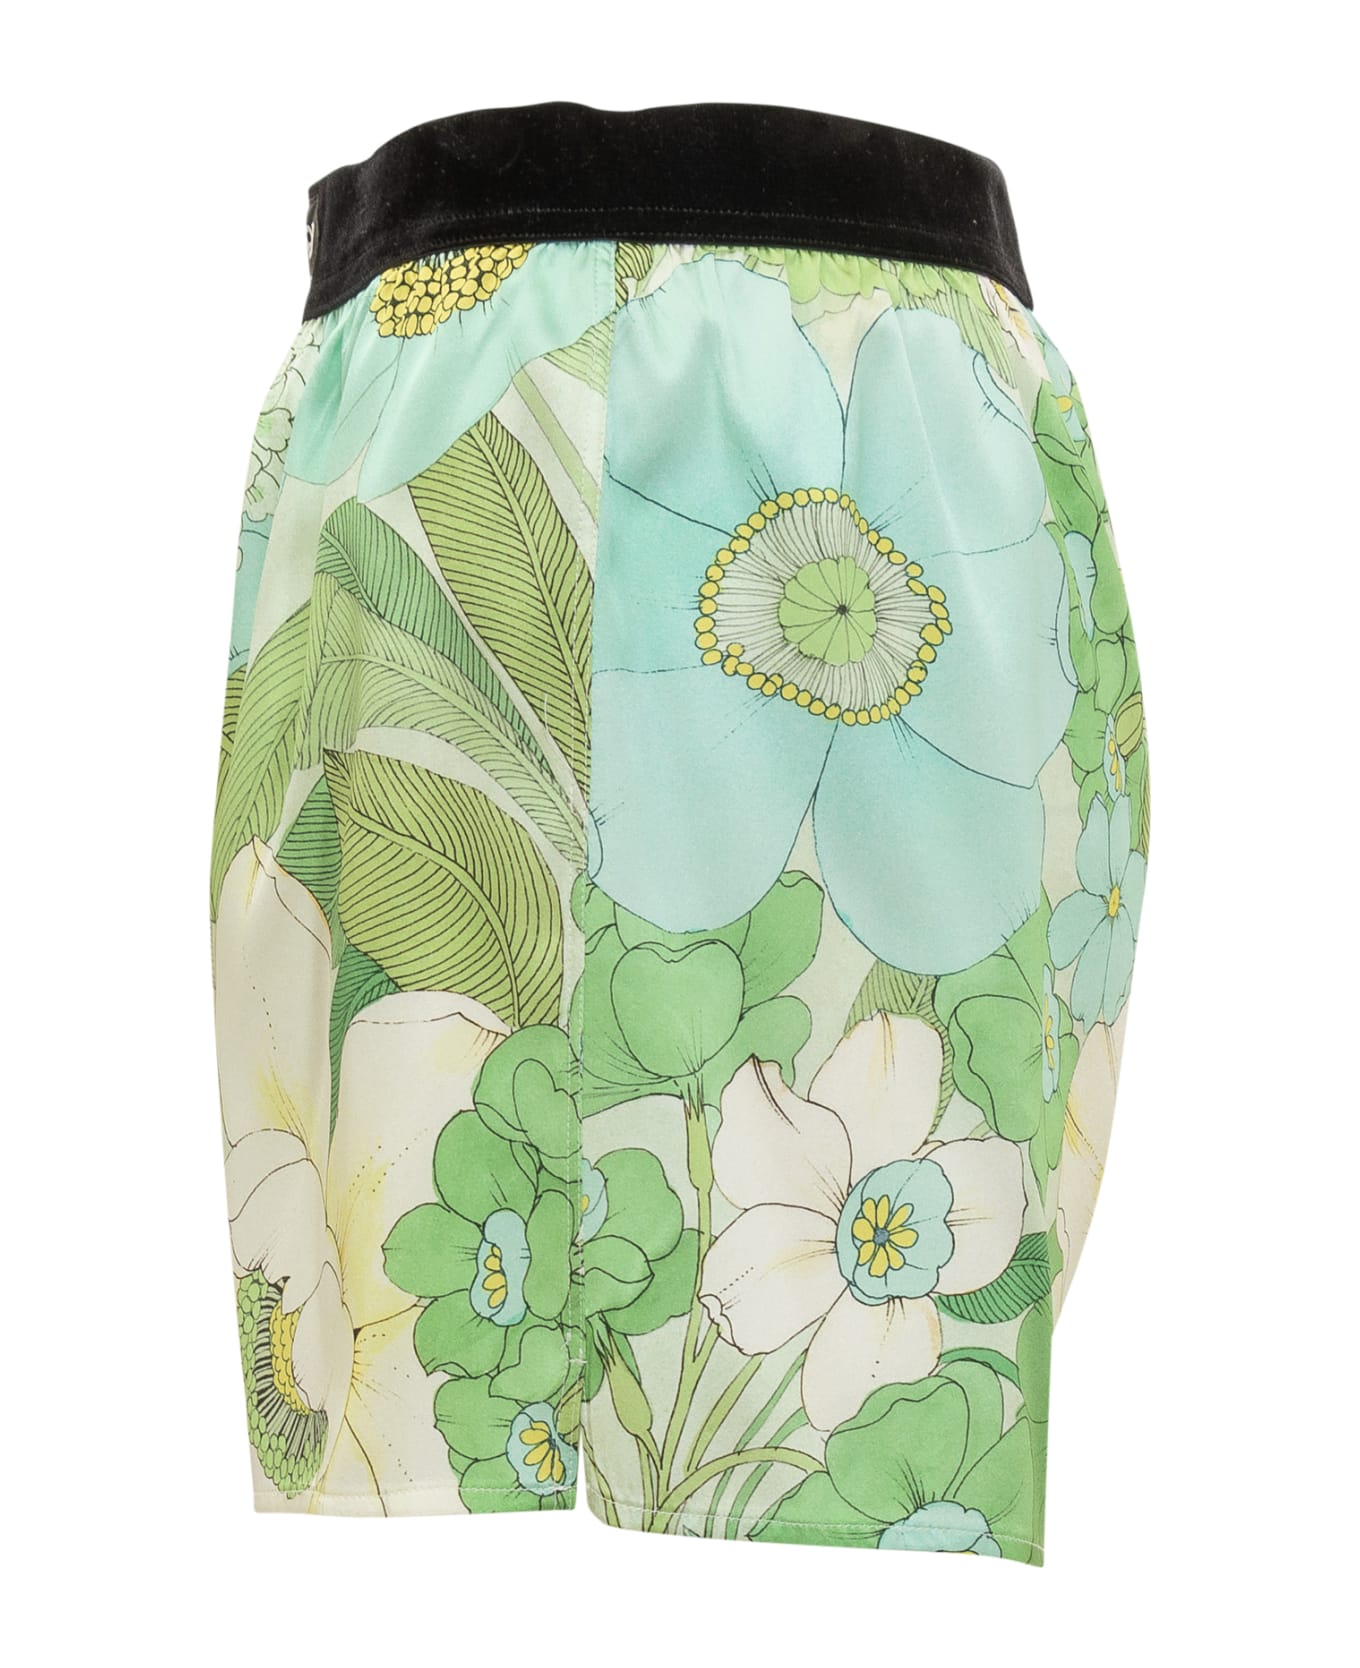 Tom Ford Shorts With Floral Decoration - ZAQGR AQUA/PALE GREEN